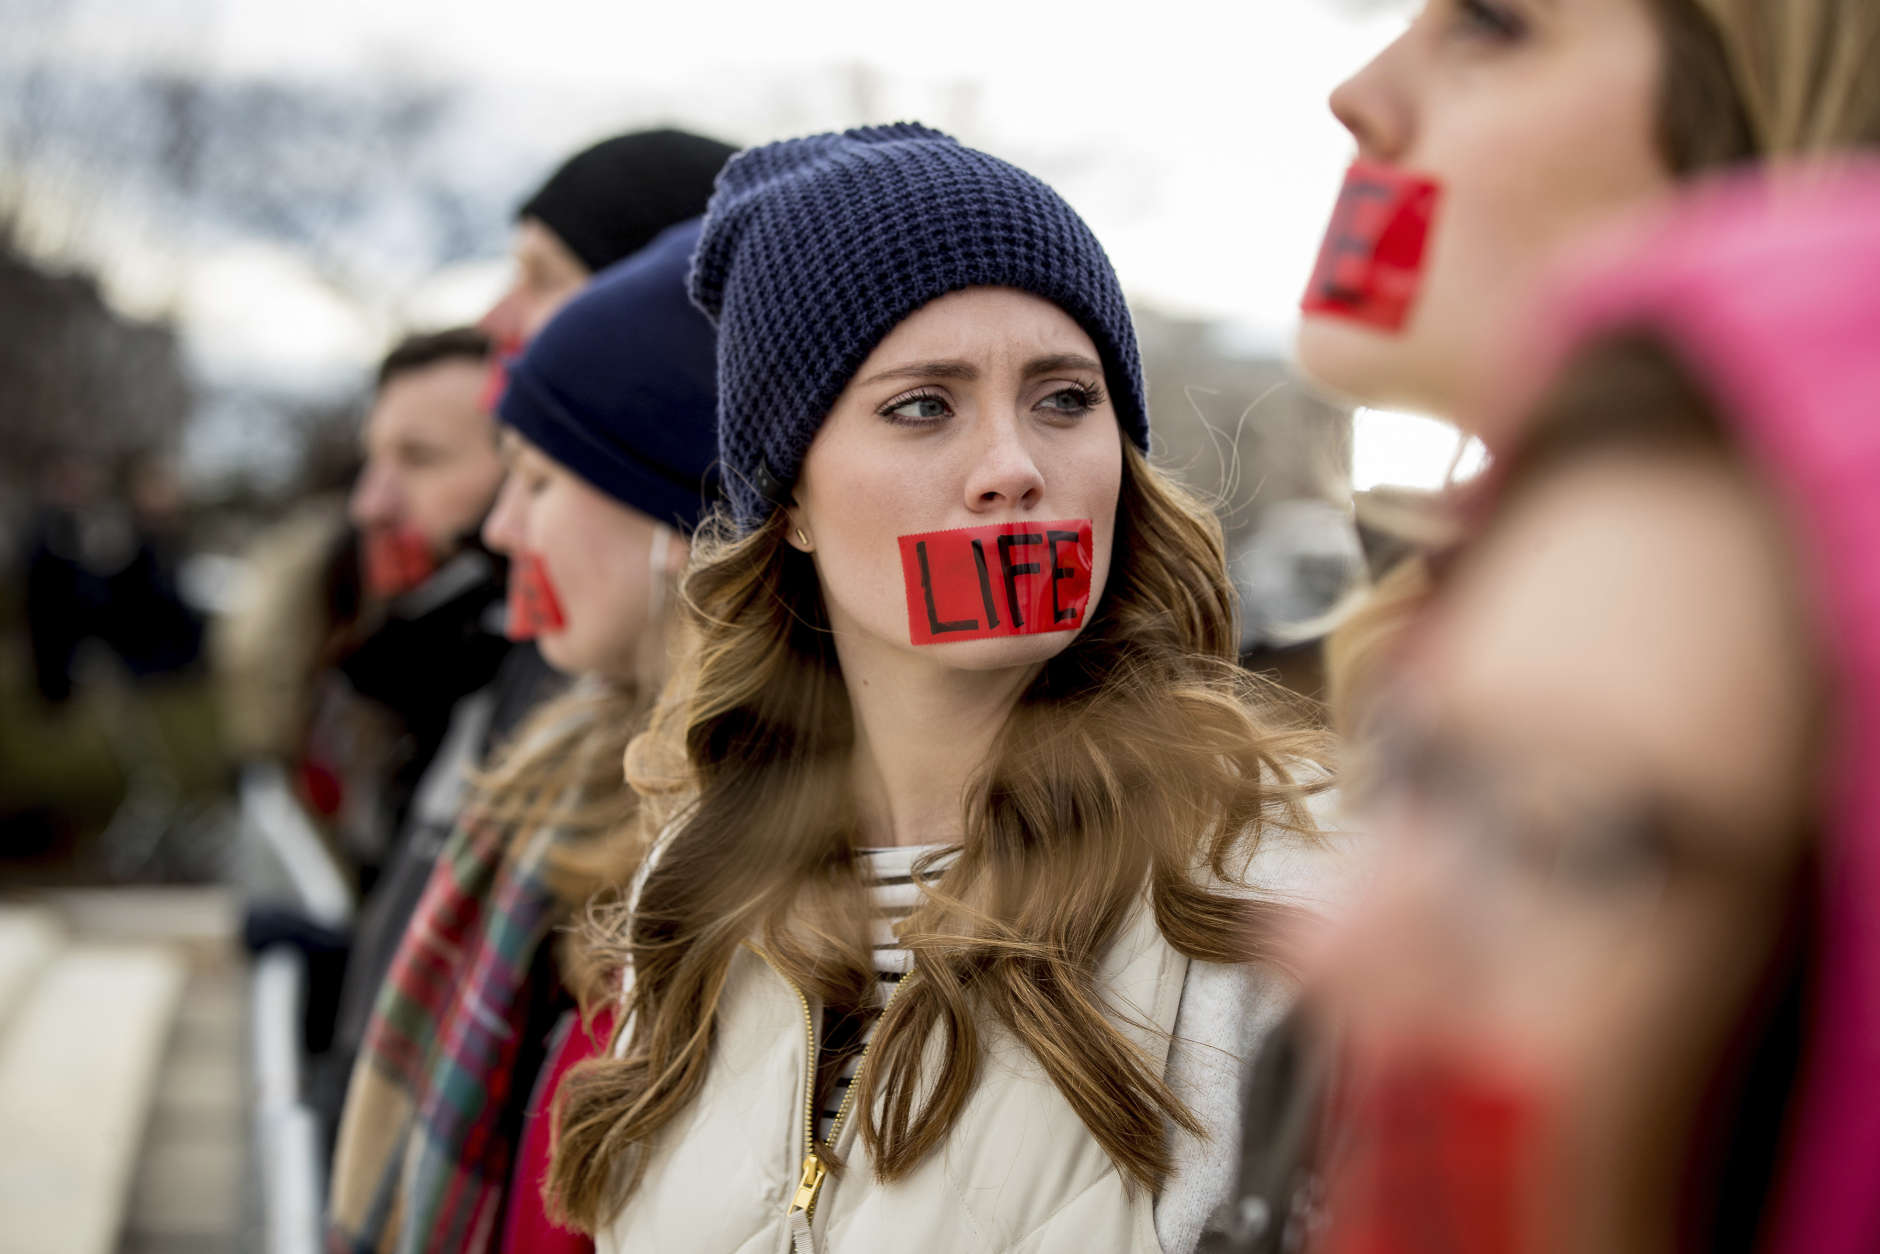 Anti-abortion activists converge in front of the Supreme Court in Washington, Friday, Jan. 27, 2017, during the annual March for Life. Thousands of anti-abortion demonstrators gathered in Washington for an annual march to protest the Supreme Court's landmark 1973 decision that declared a constitutional right to abortion. (AP Photo/Andrew Harnik)